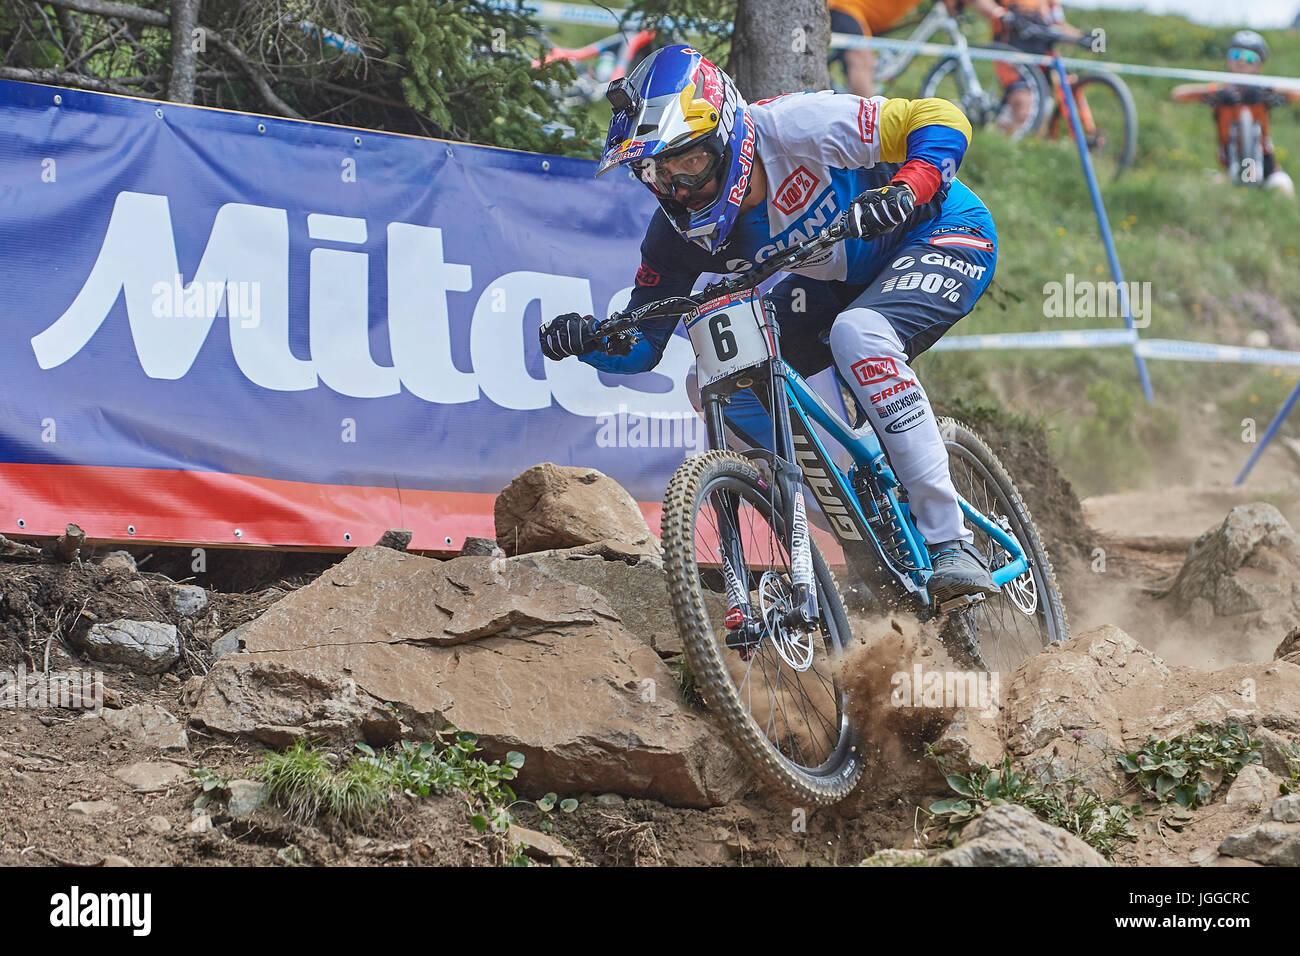 Lenzerheide, Switzerland. 7th July, 2017. Marcelo Gutierrez Villegas from GIANT FACTORY OFF-ROAD TEAM during his qualifying run at the UCI Mountain Bike Downhill Worldcup in Lenzerheide. Credit: Rolf Simeon/bildgebend.ch/Alamy Live News Stock Photo